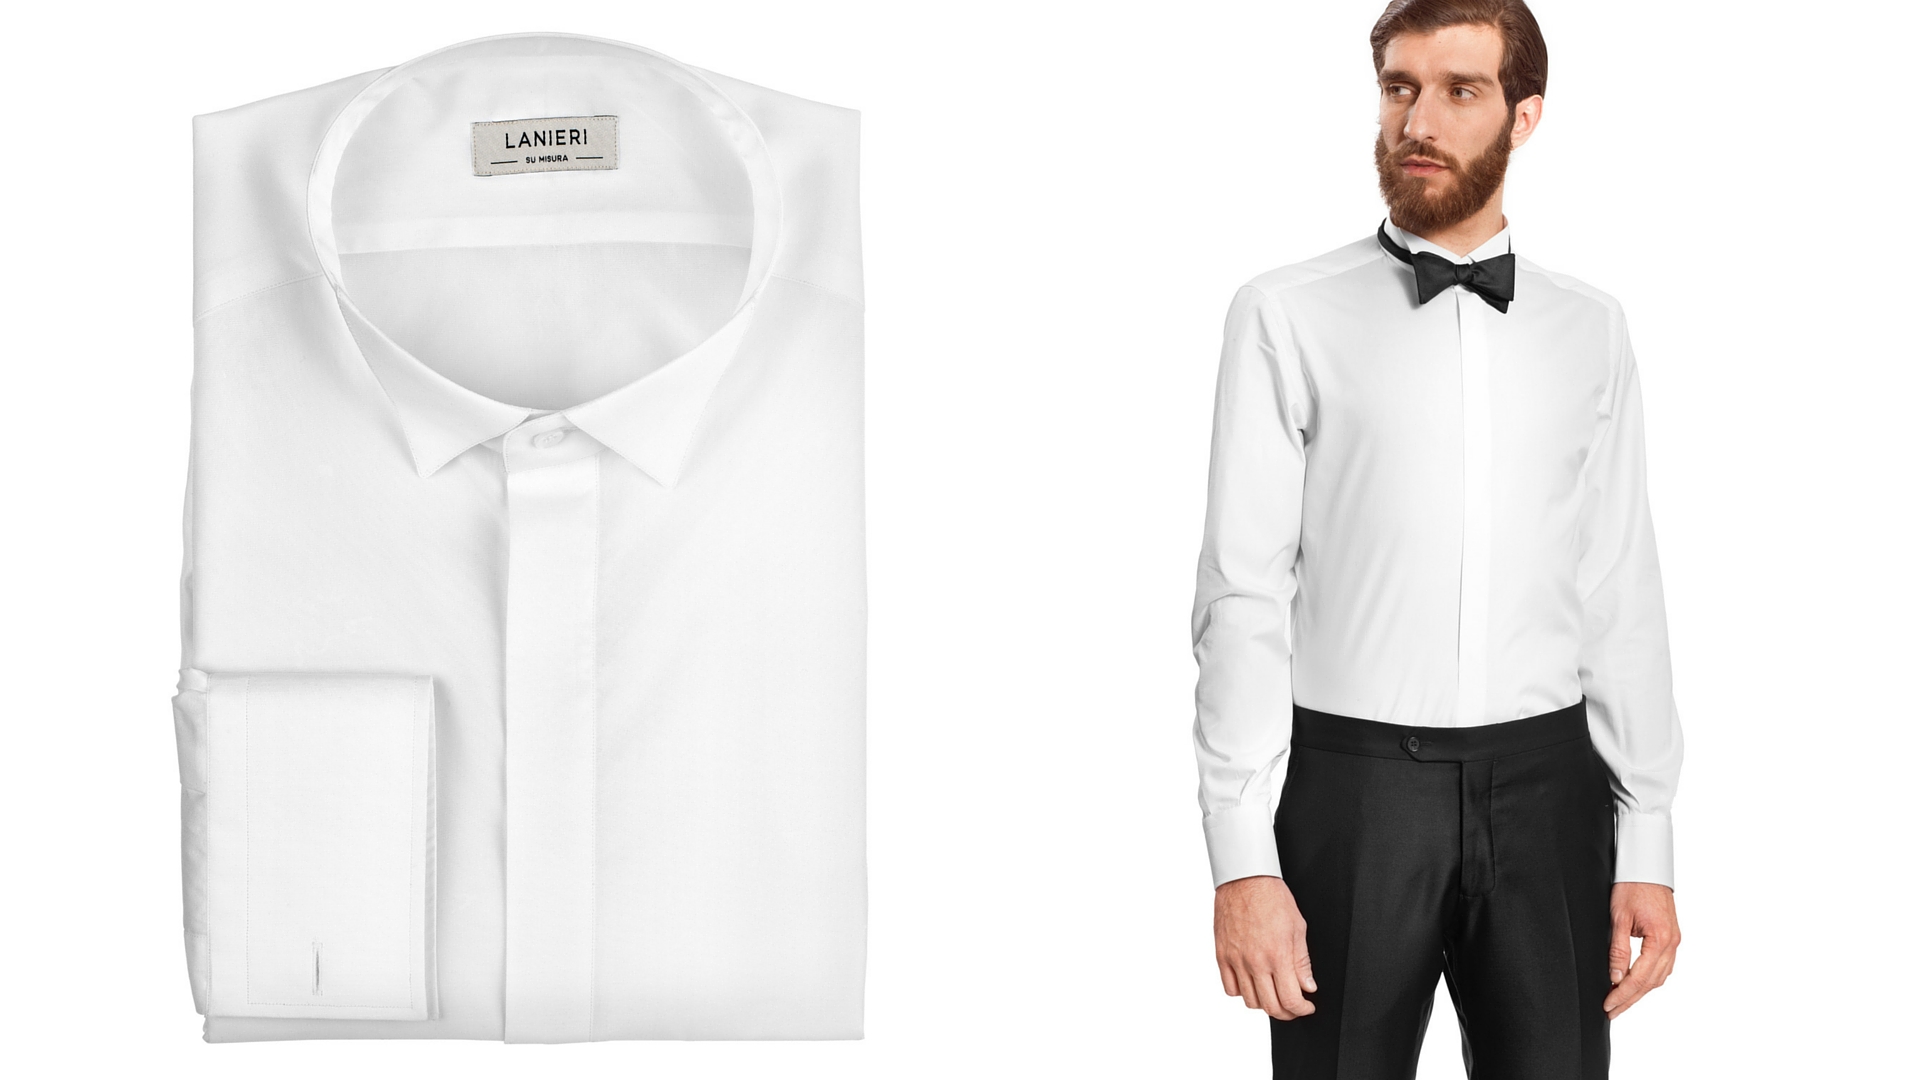 White shirt with wingtip collar for tuxedos and how it looks wearing a black bow tie.